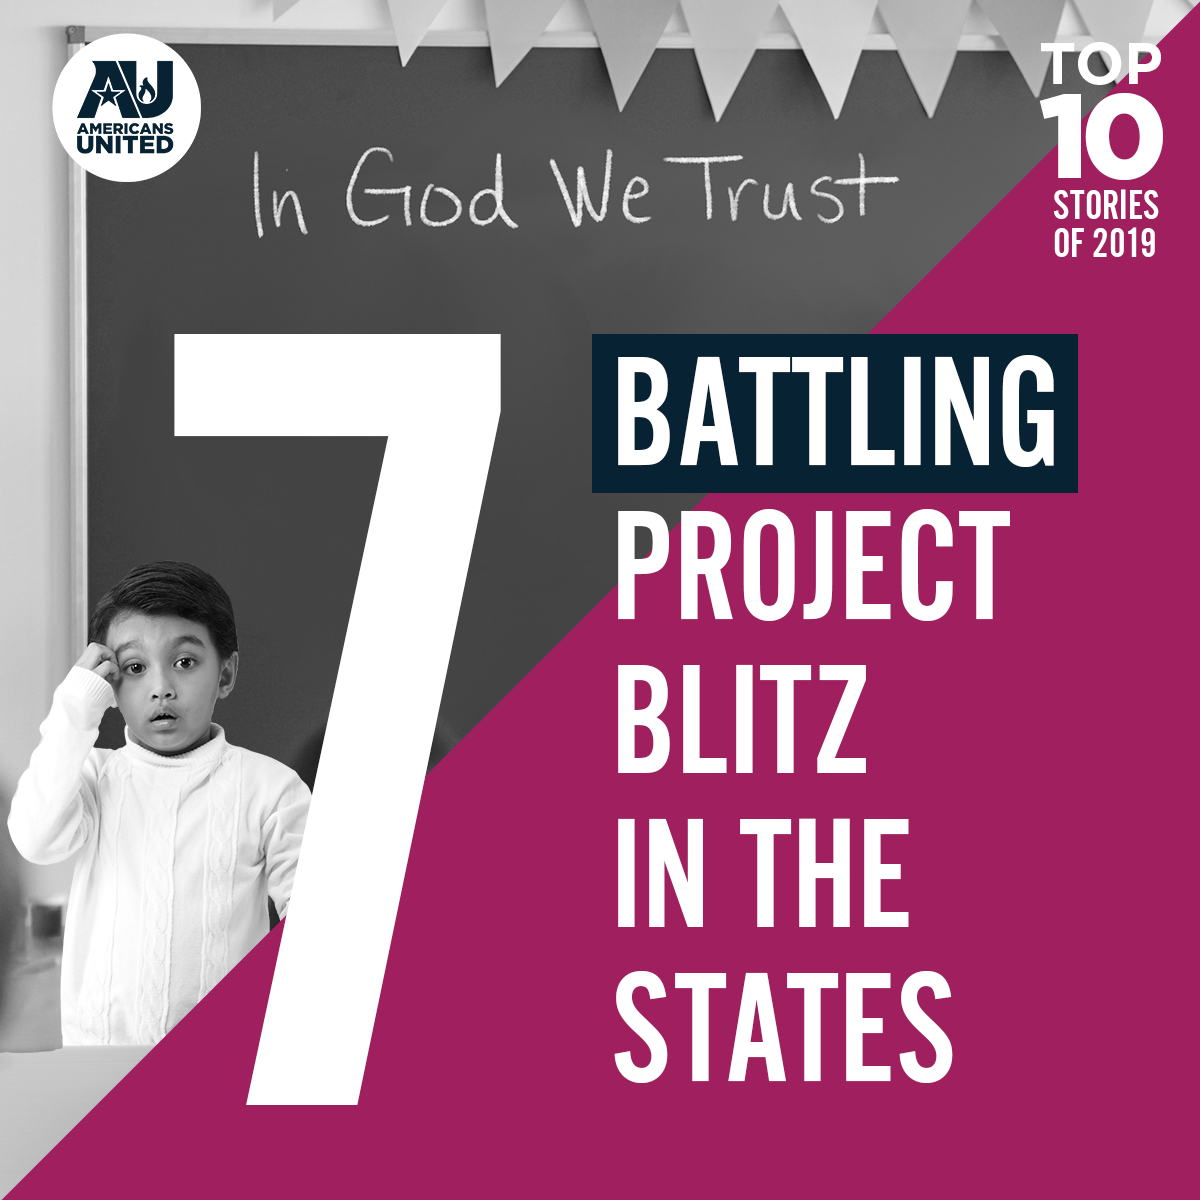 No. 7 Battling Project Blitz in the States